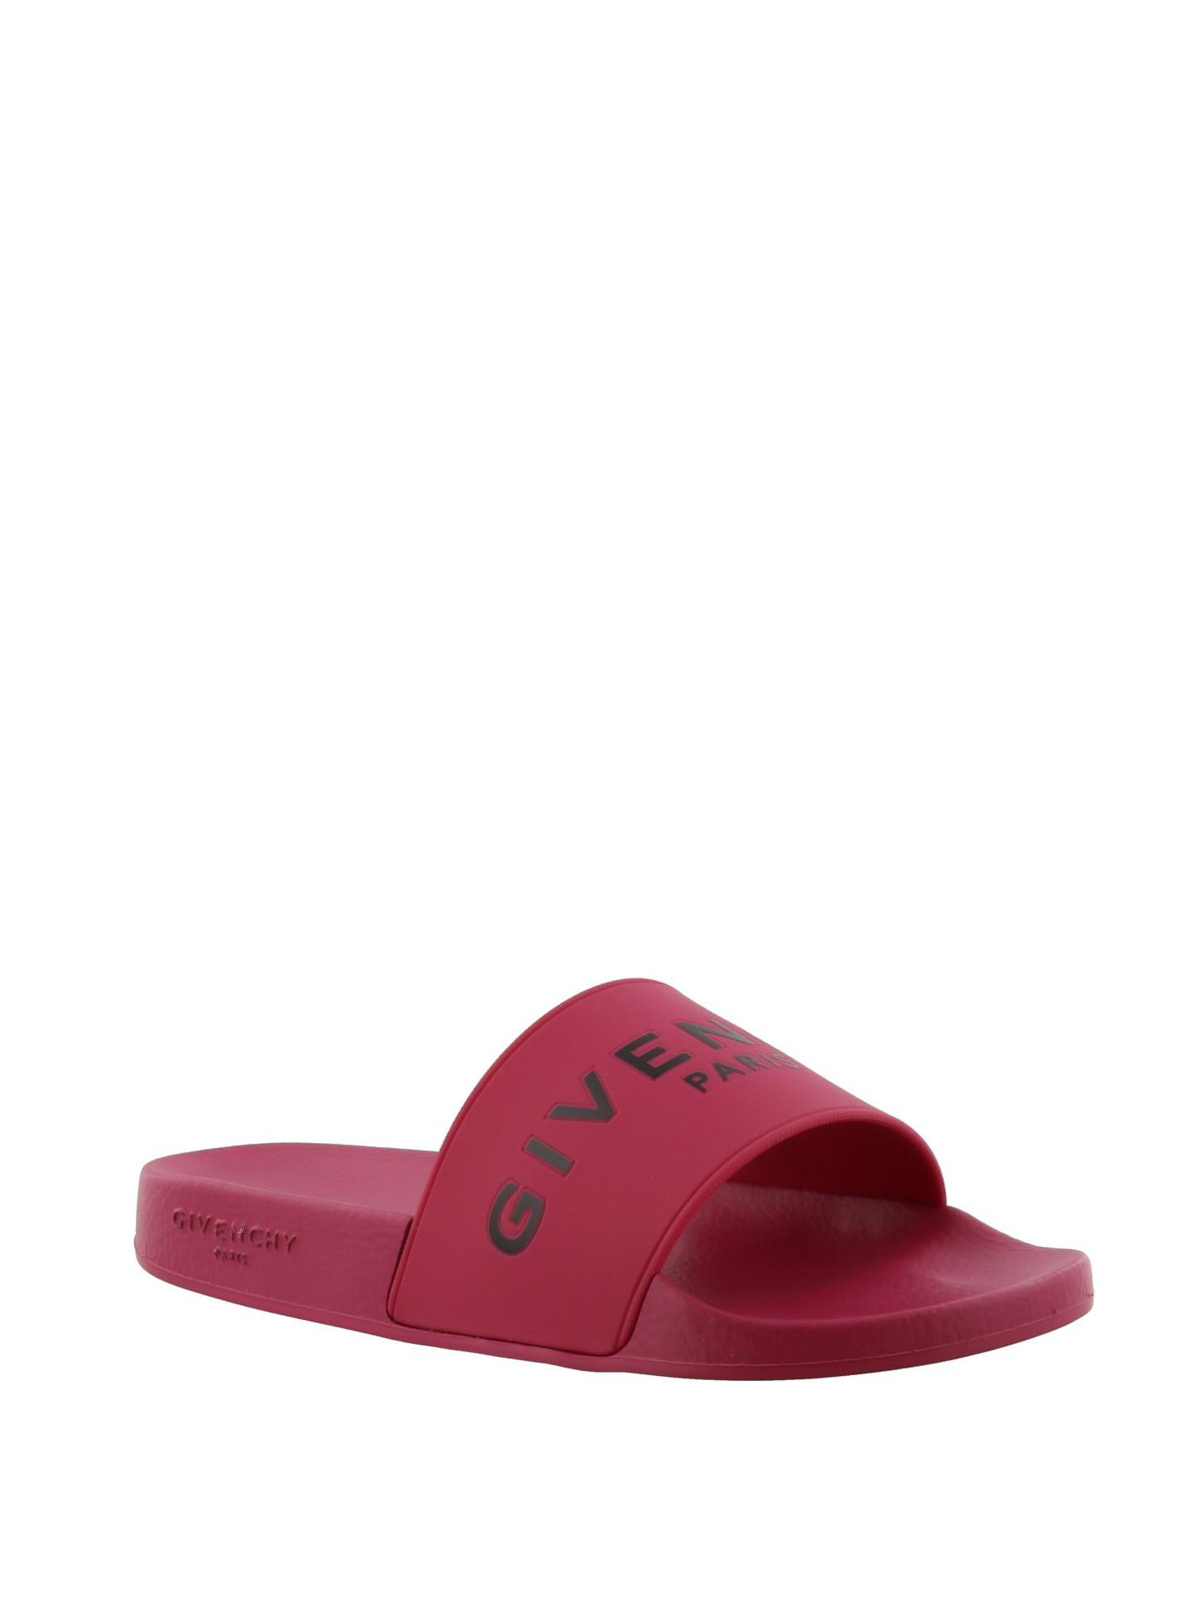 Sandals Givenchy - Givenchy Paris red rubber slides - BE08209809653